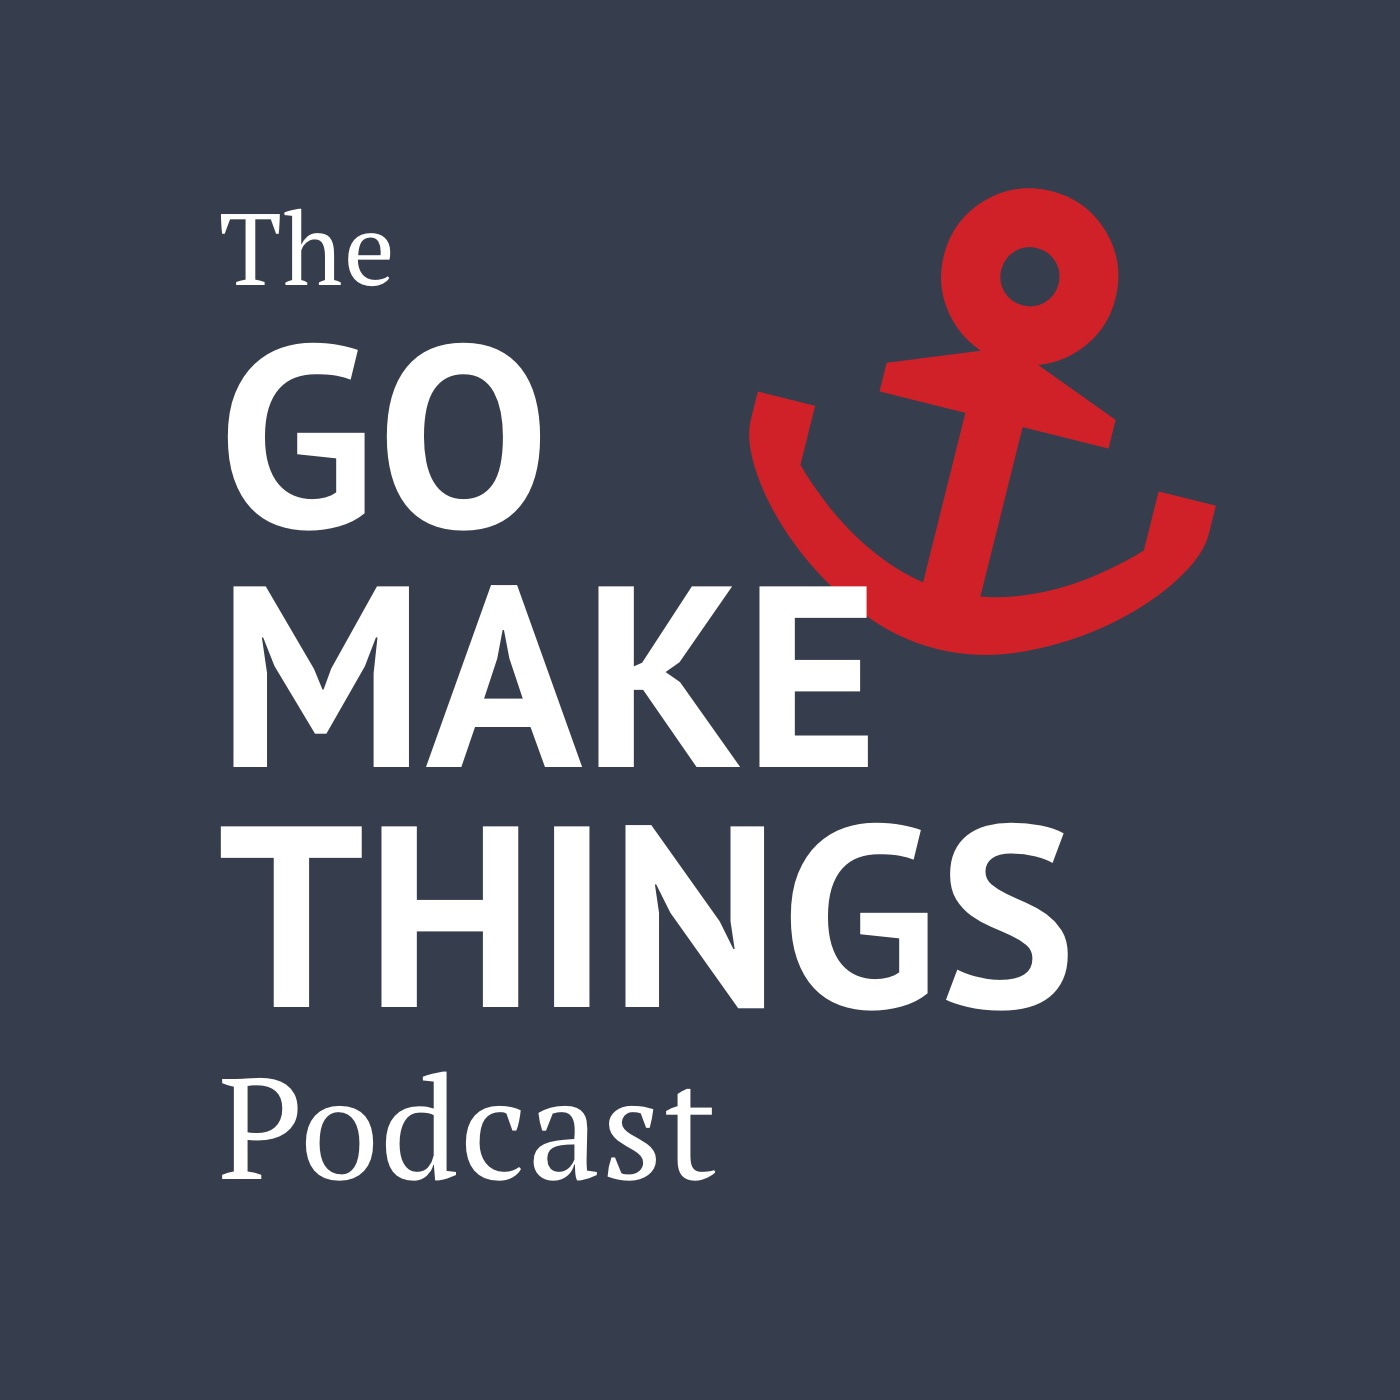 The Go Make Things Podcast